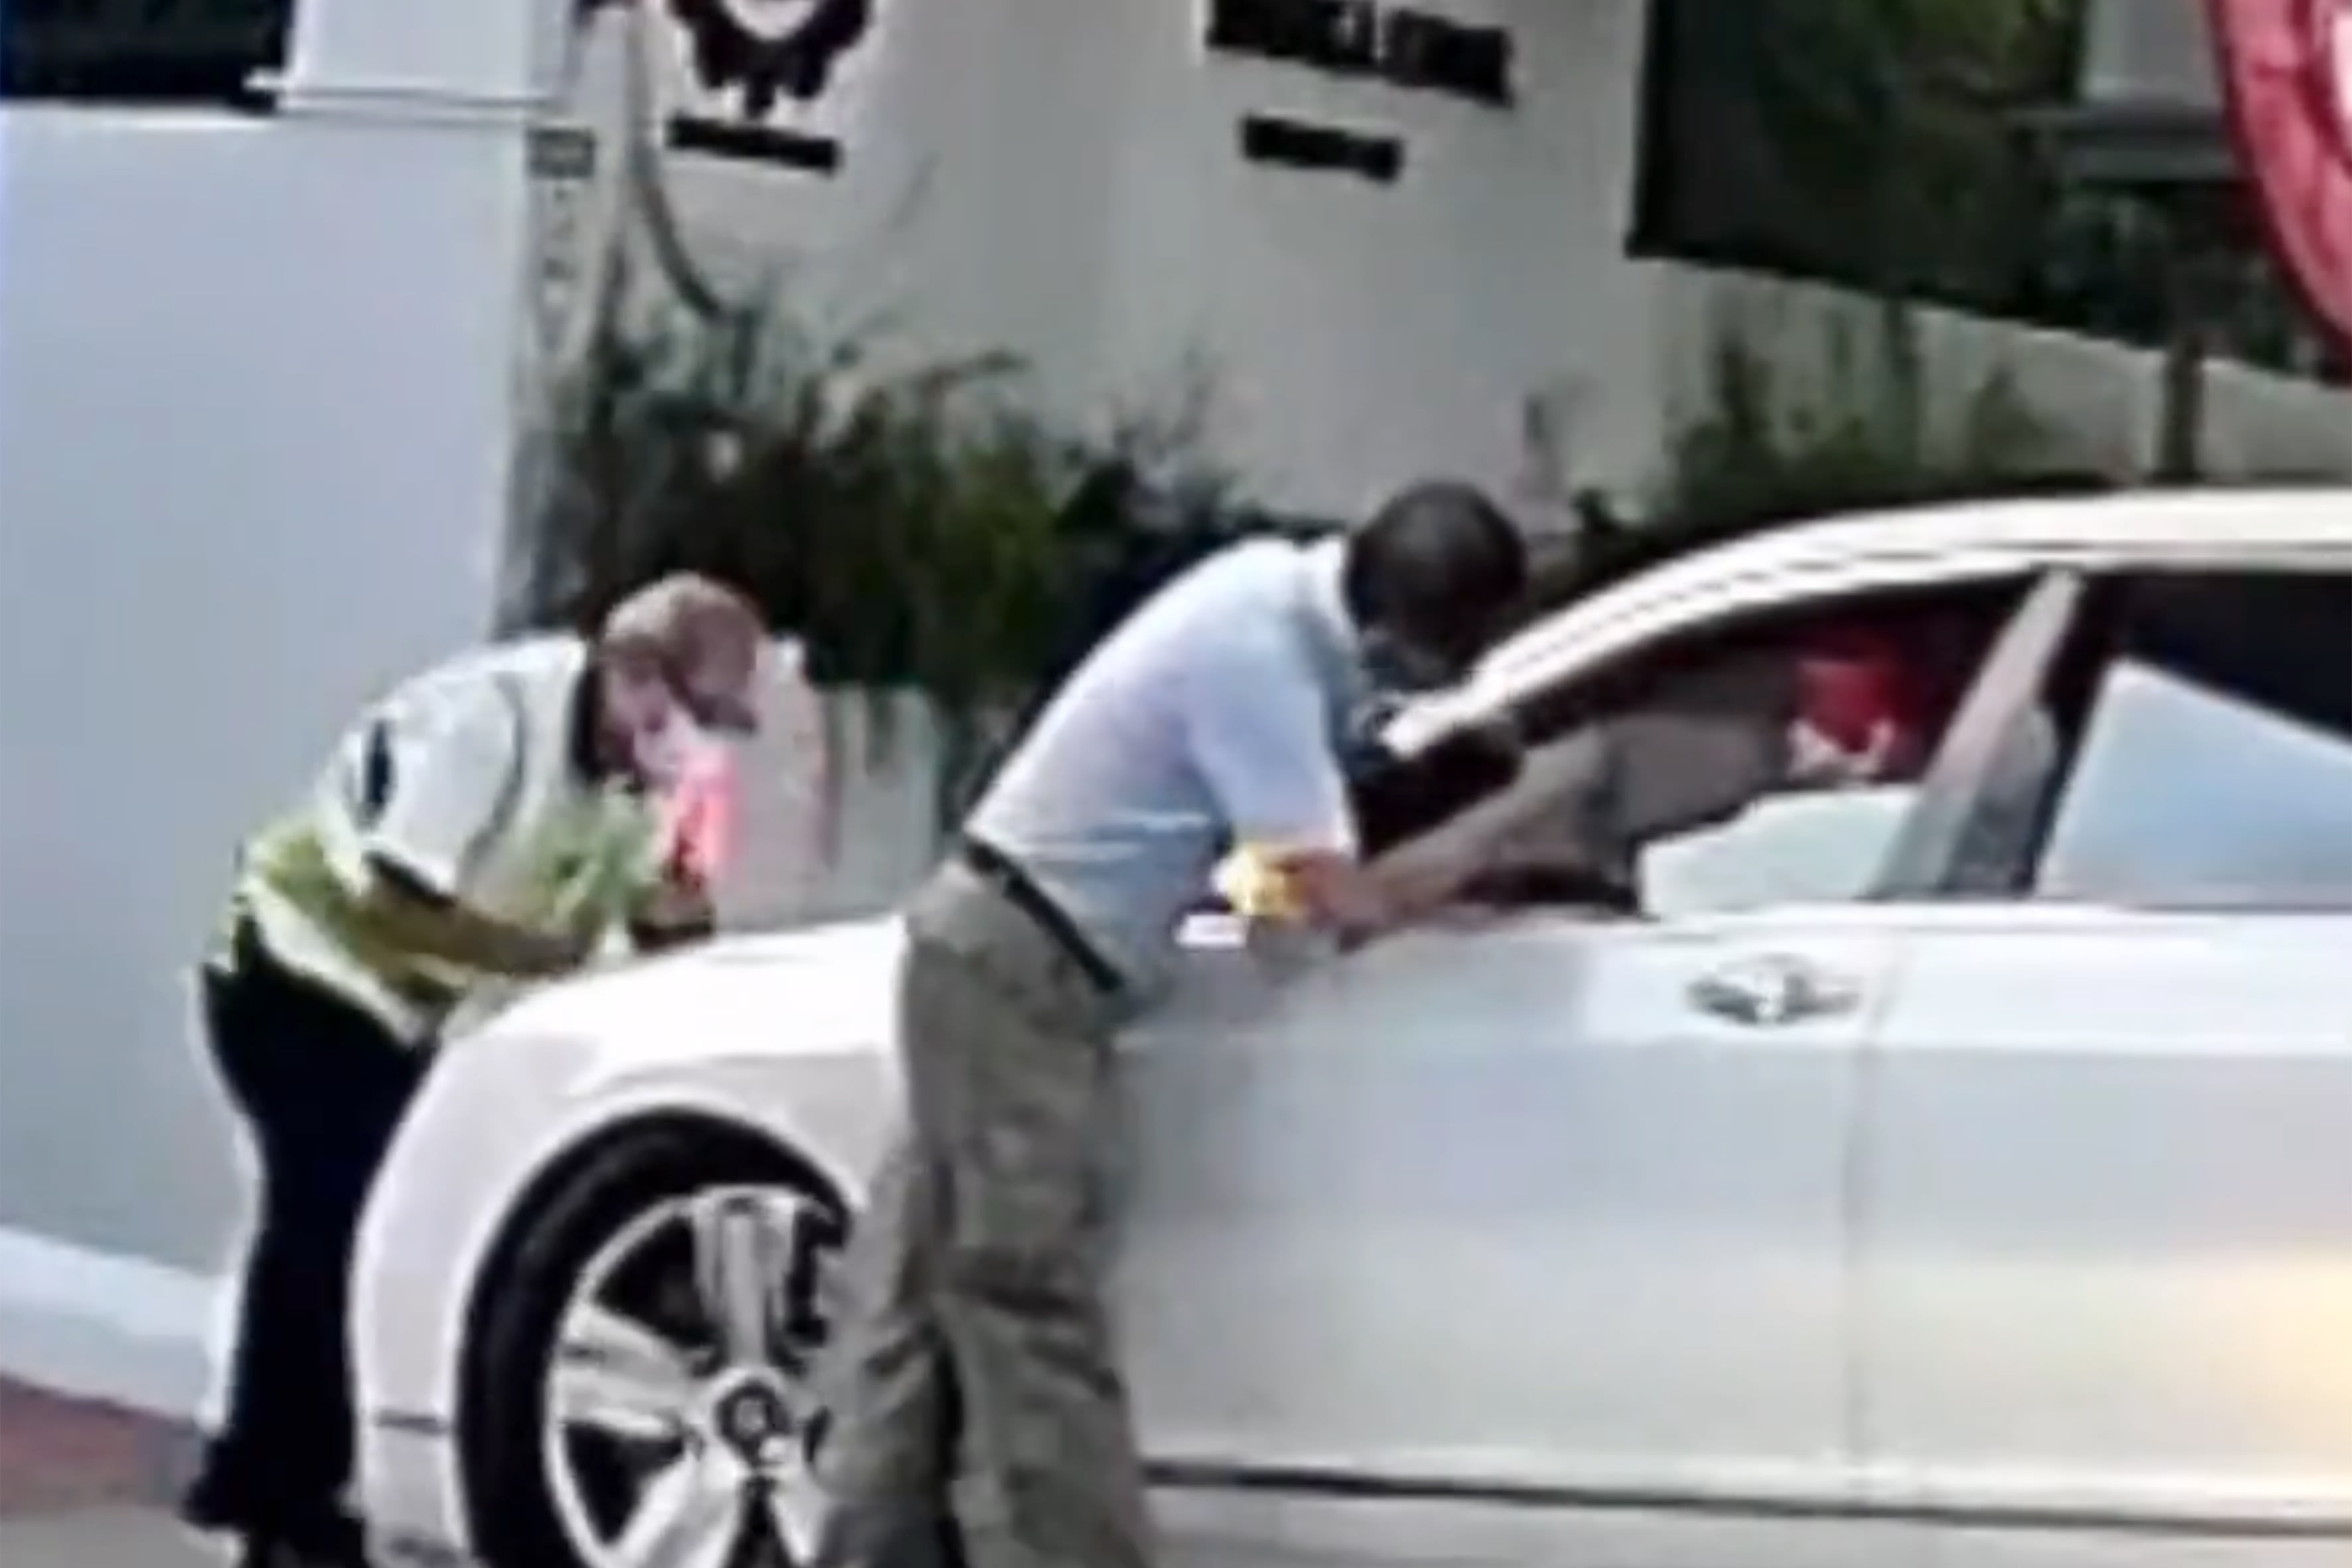 A screenshot from a video showing a security officer and a staff member of Red Swastika School preventing a car from entering the school compound.